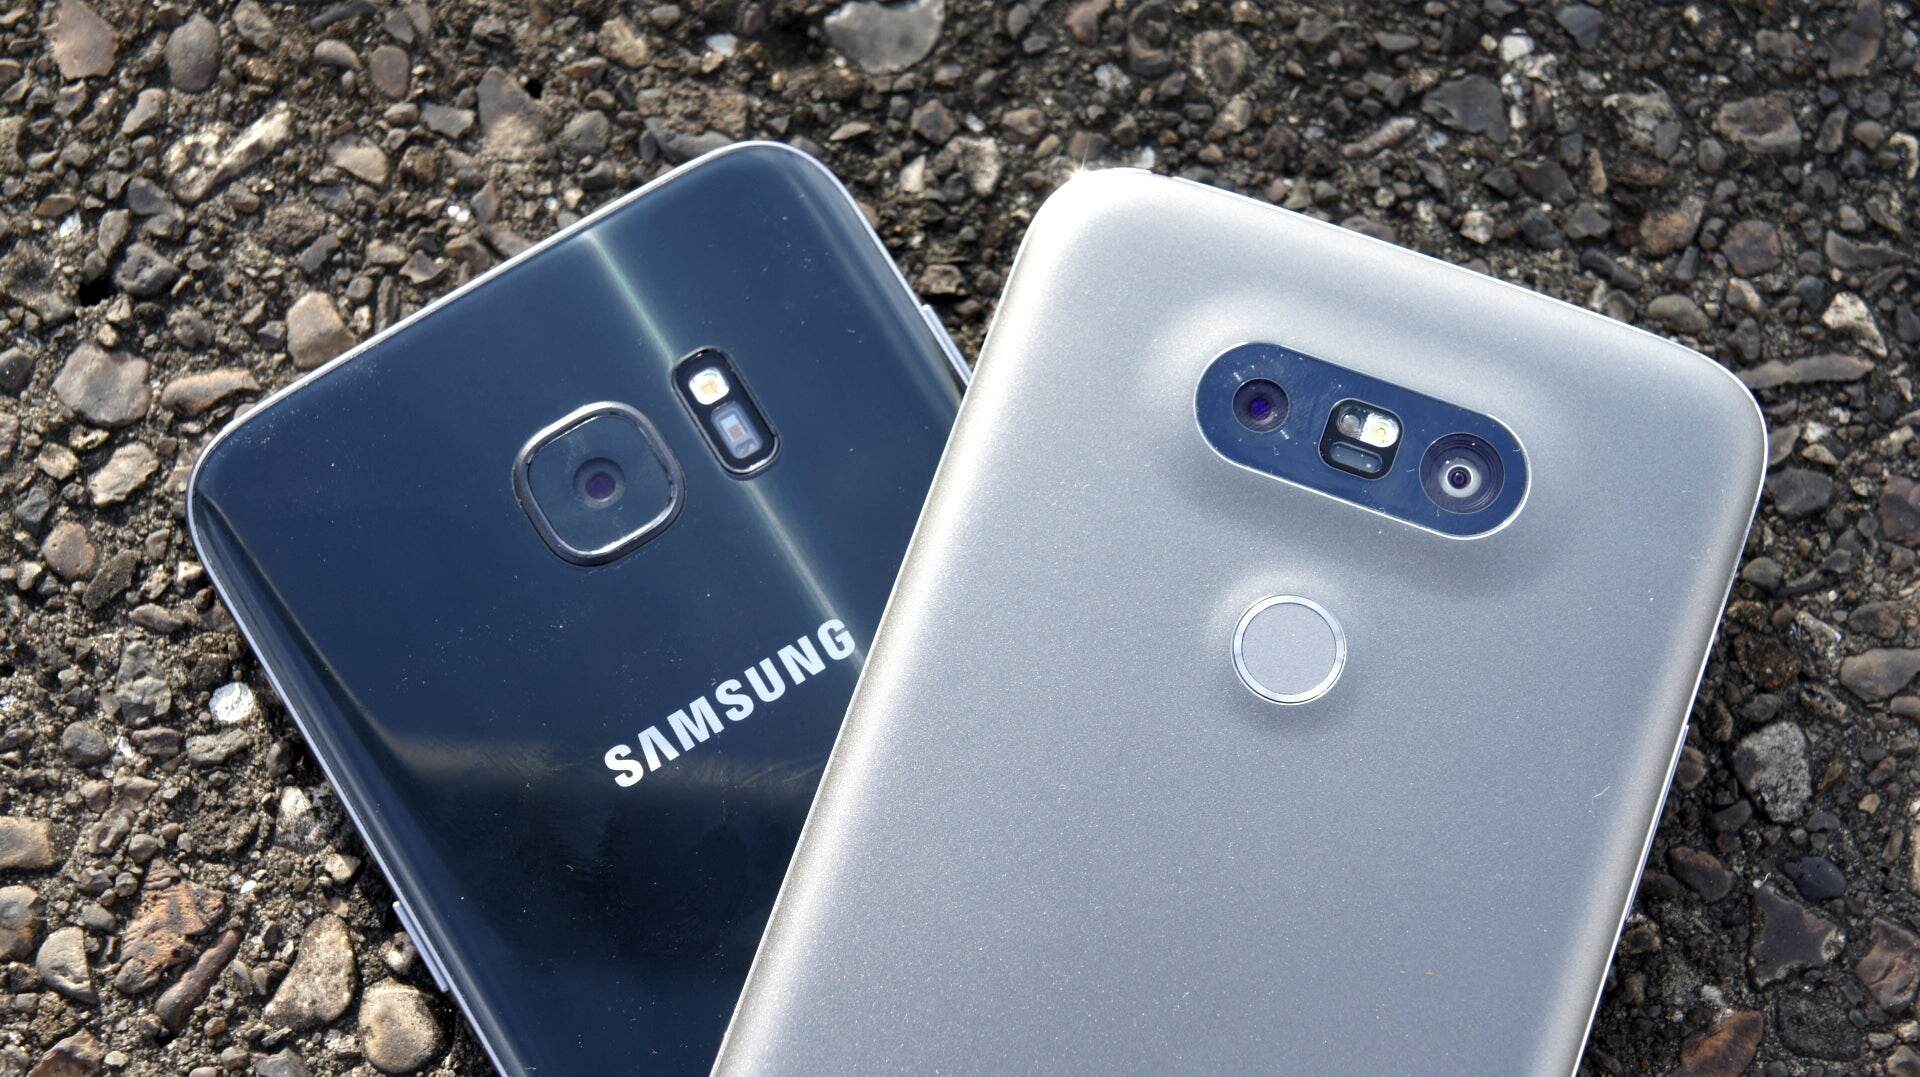 galaxy-s7-vs-lg-g5-in-depth-comparison-which-is-best